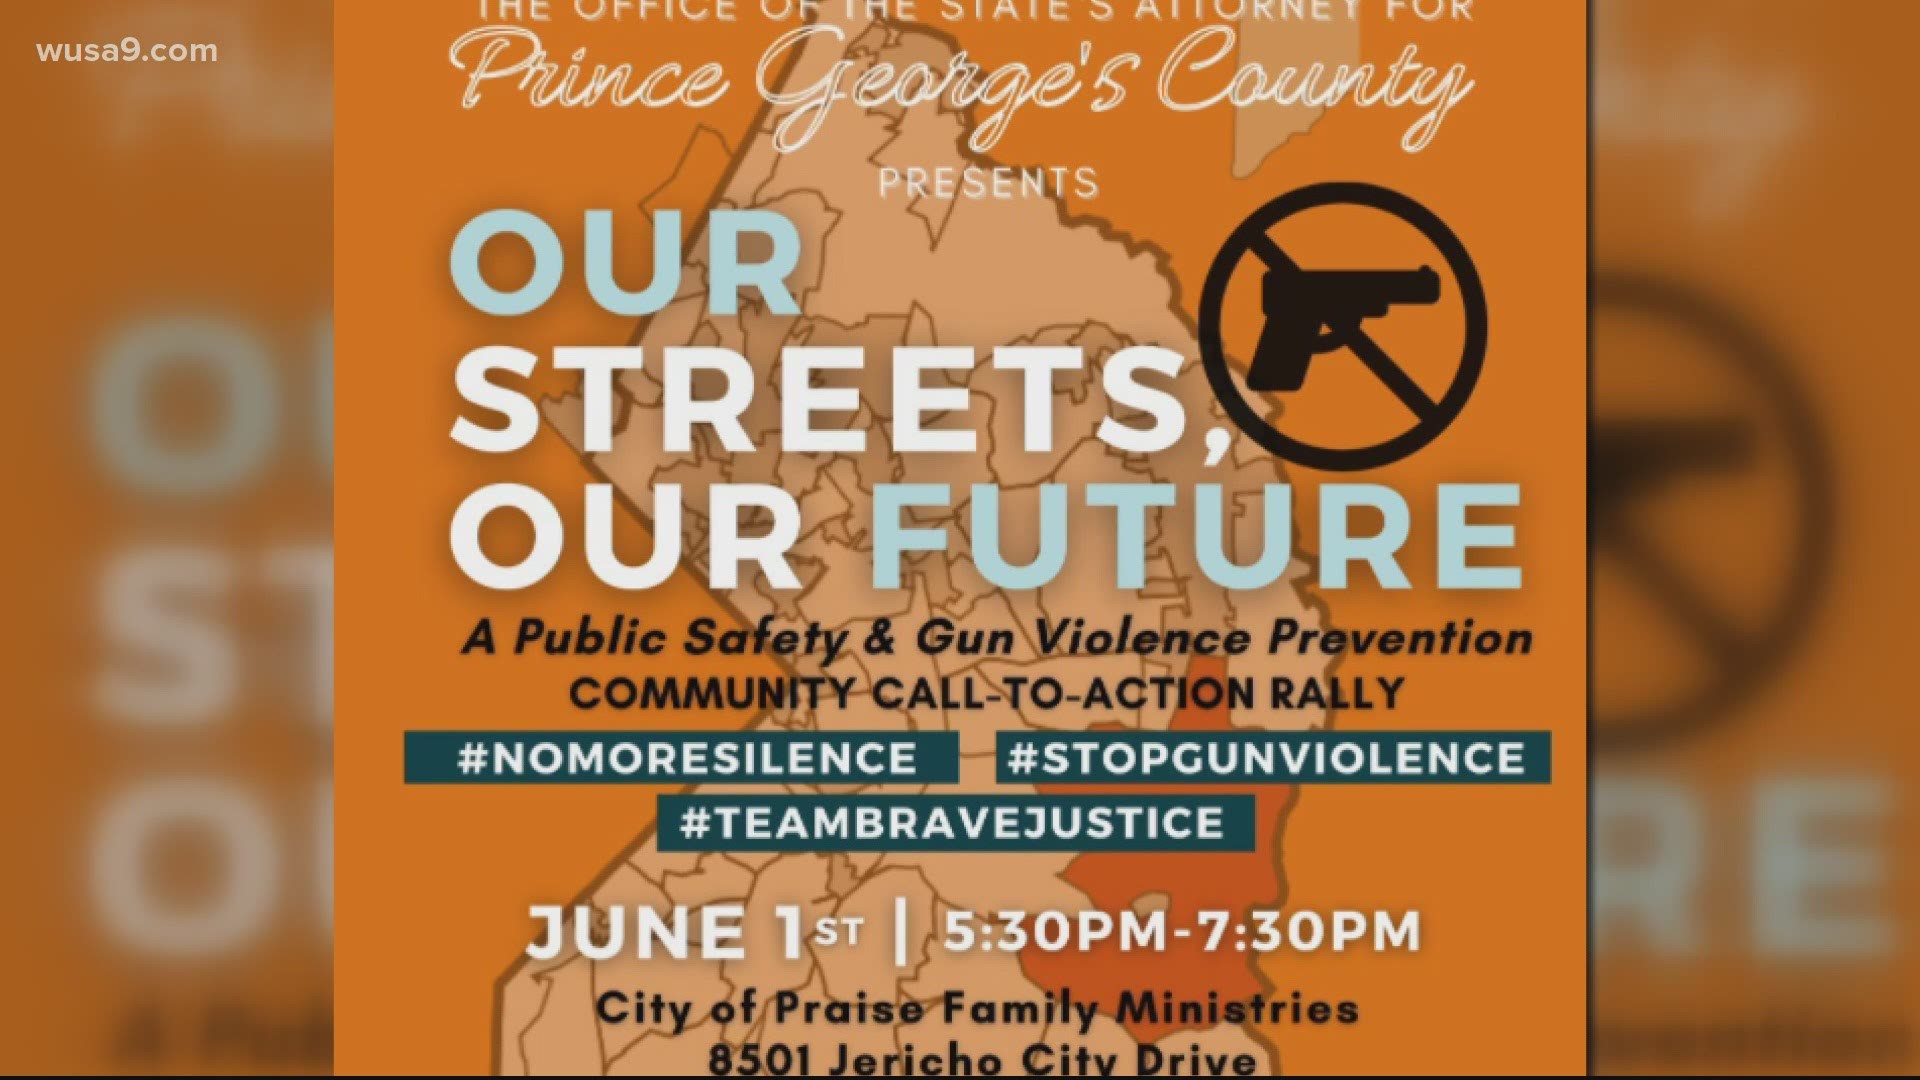 Prince George's County hosts Our streets, Our future at the City of Praise Ministries on Jericho City Drive in Landover.